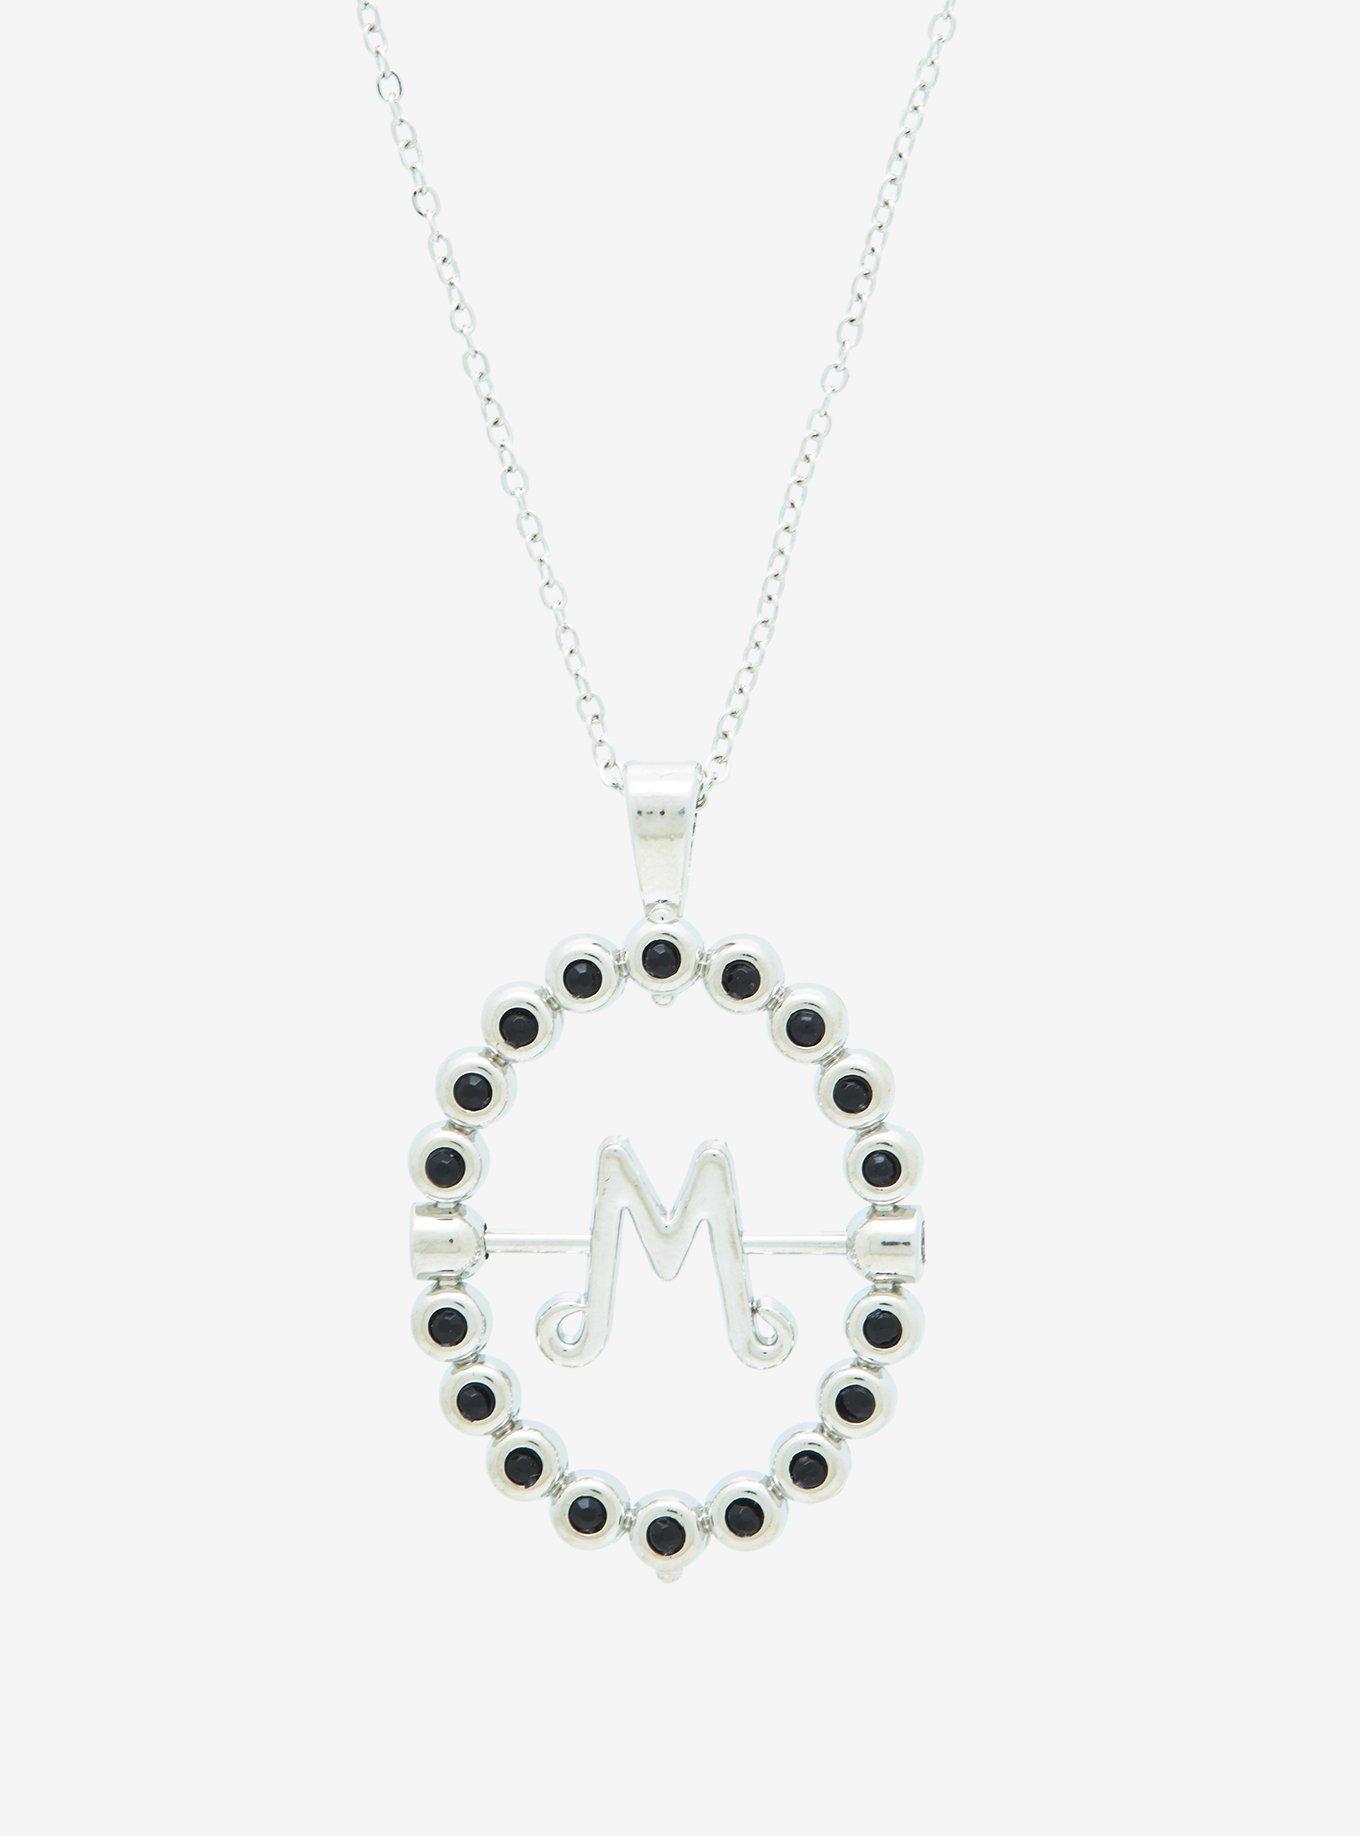 Wednesday Morticia Addams Replica Necklace - BoxLunch Exclusive, , alternate